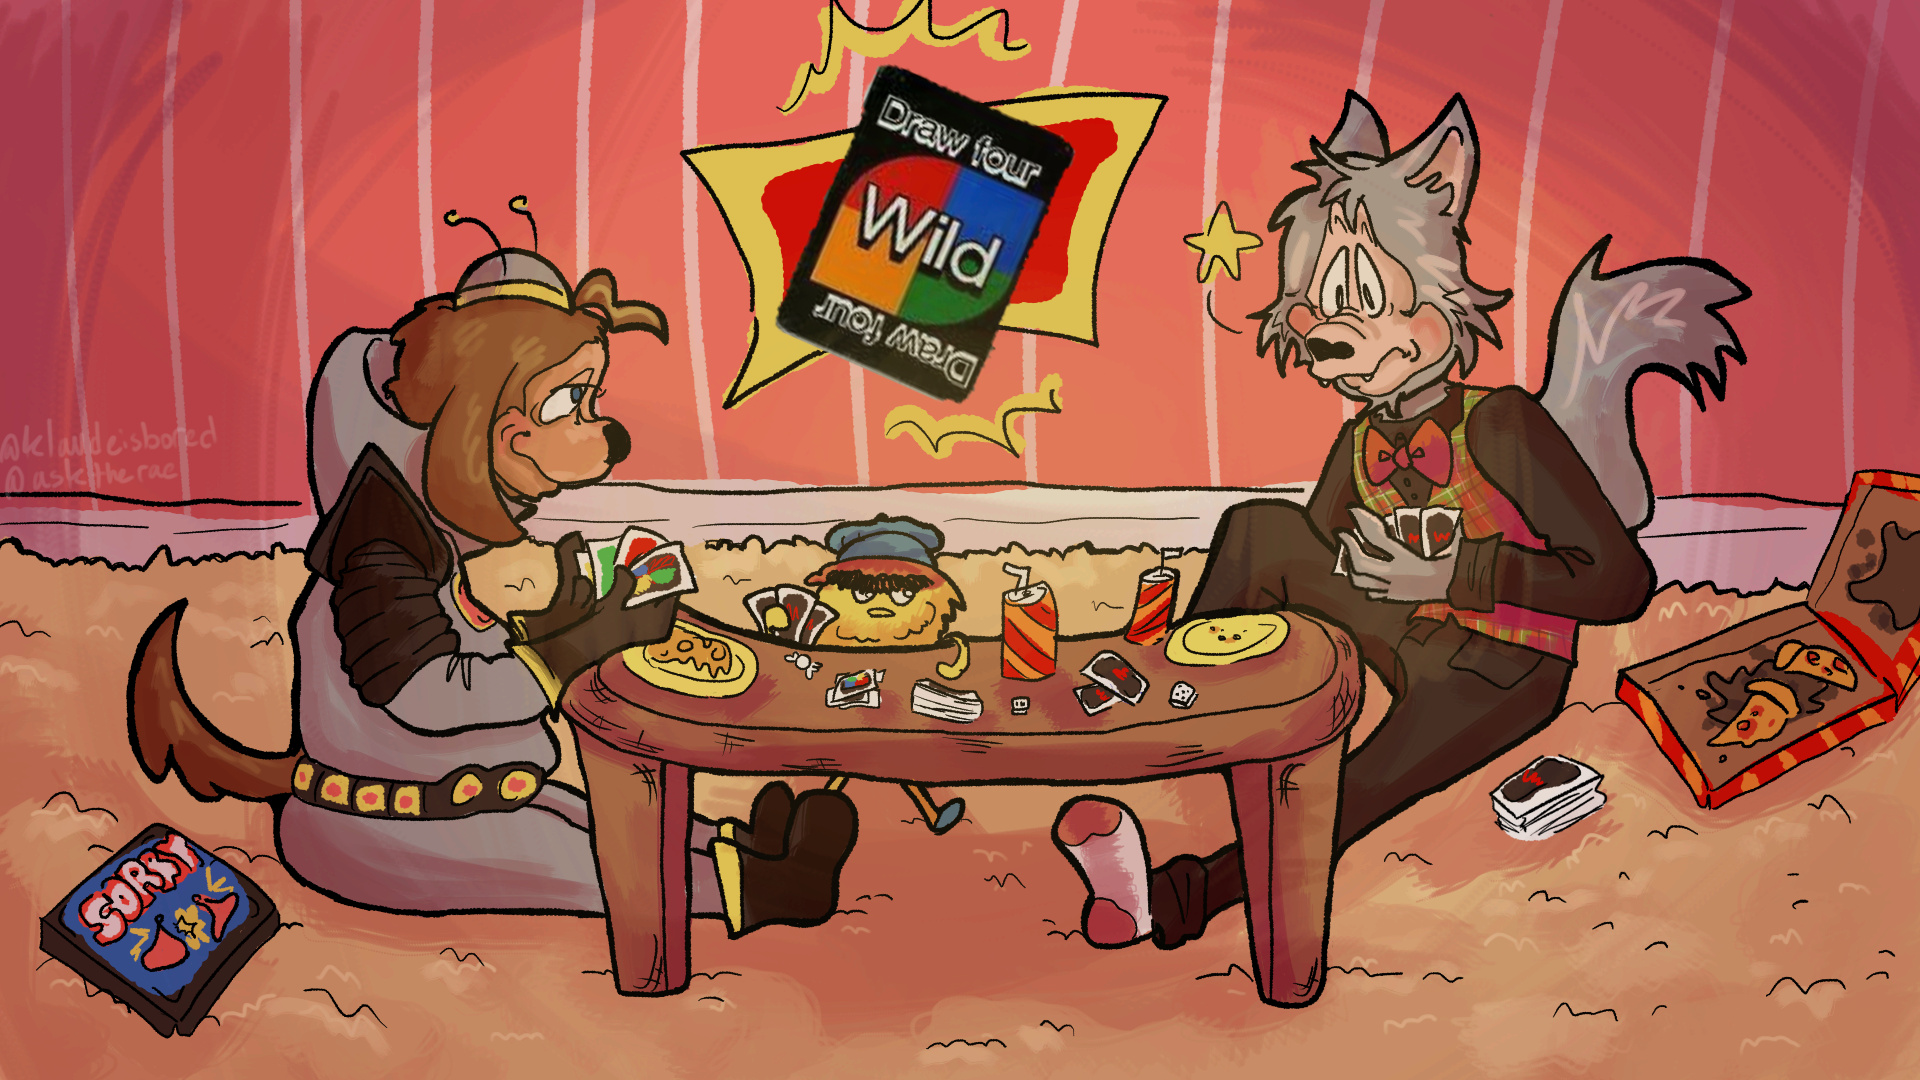 A digital drawing of Dook, Earl, and Rolfe playing uno together on the floor. Dook pulls a draw 4 card on Rolfe and he looks comically worried about it. There is various junk food and cards surrounding them.